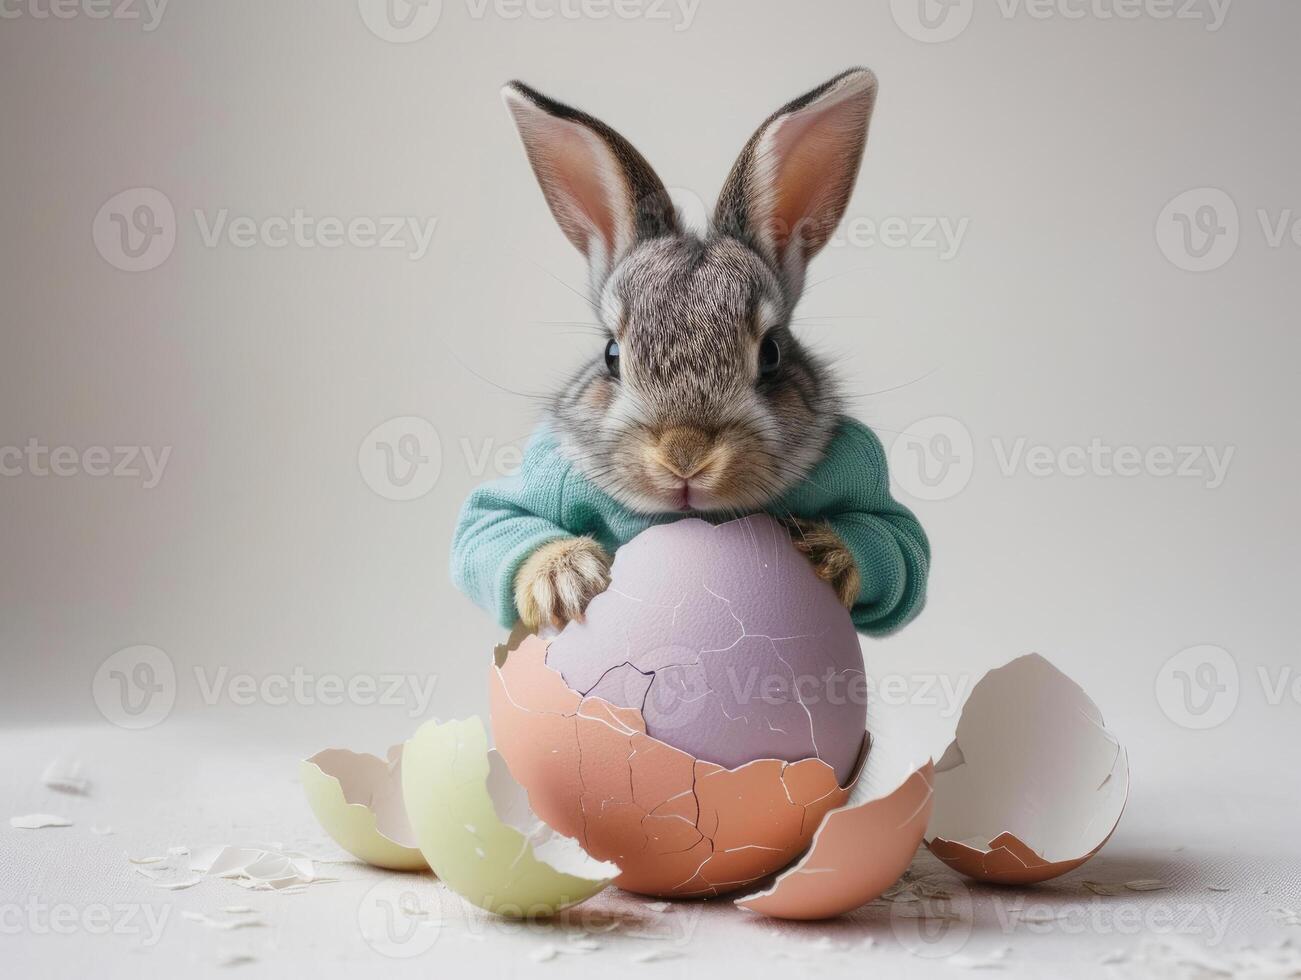 A rabbit wearing a cute shirt emerges from the big egg with beautiful colorful shells on a white background. photo